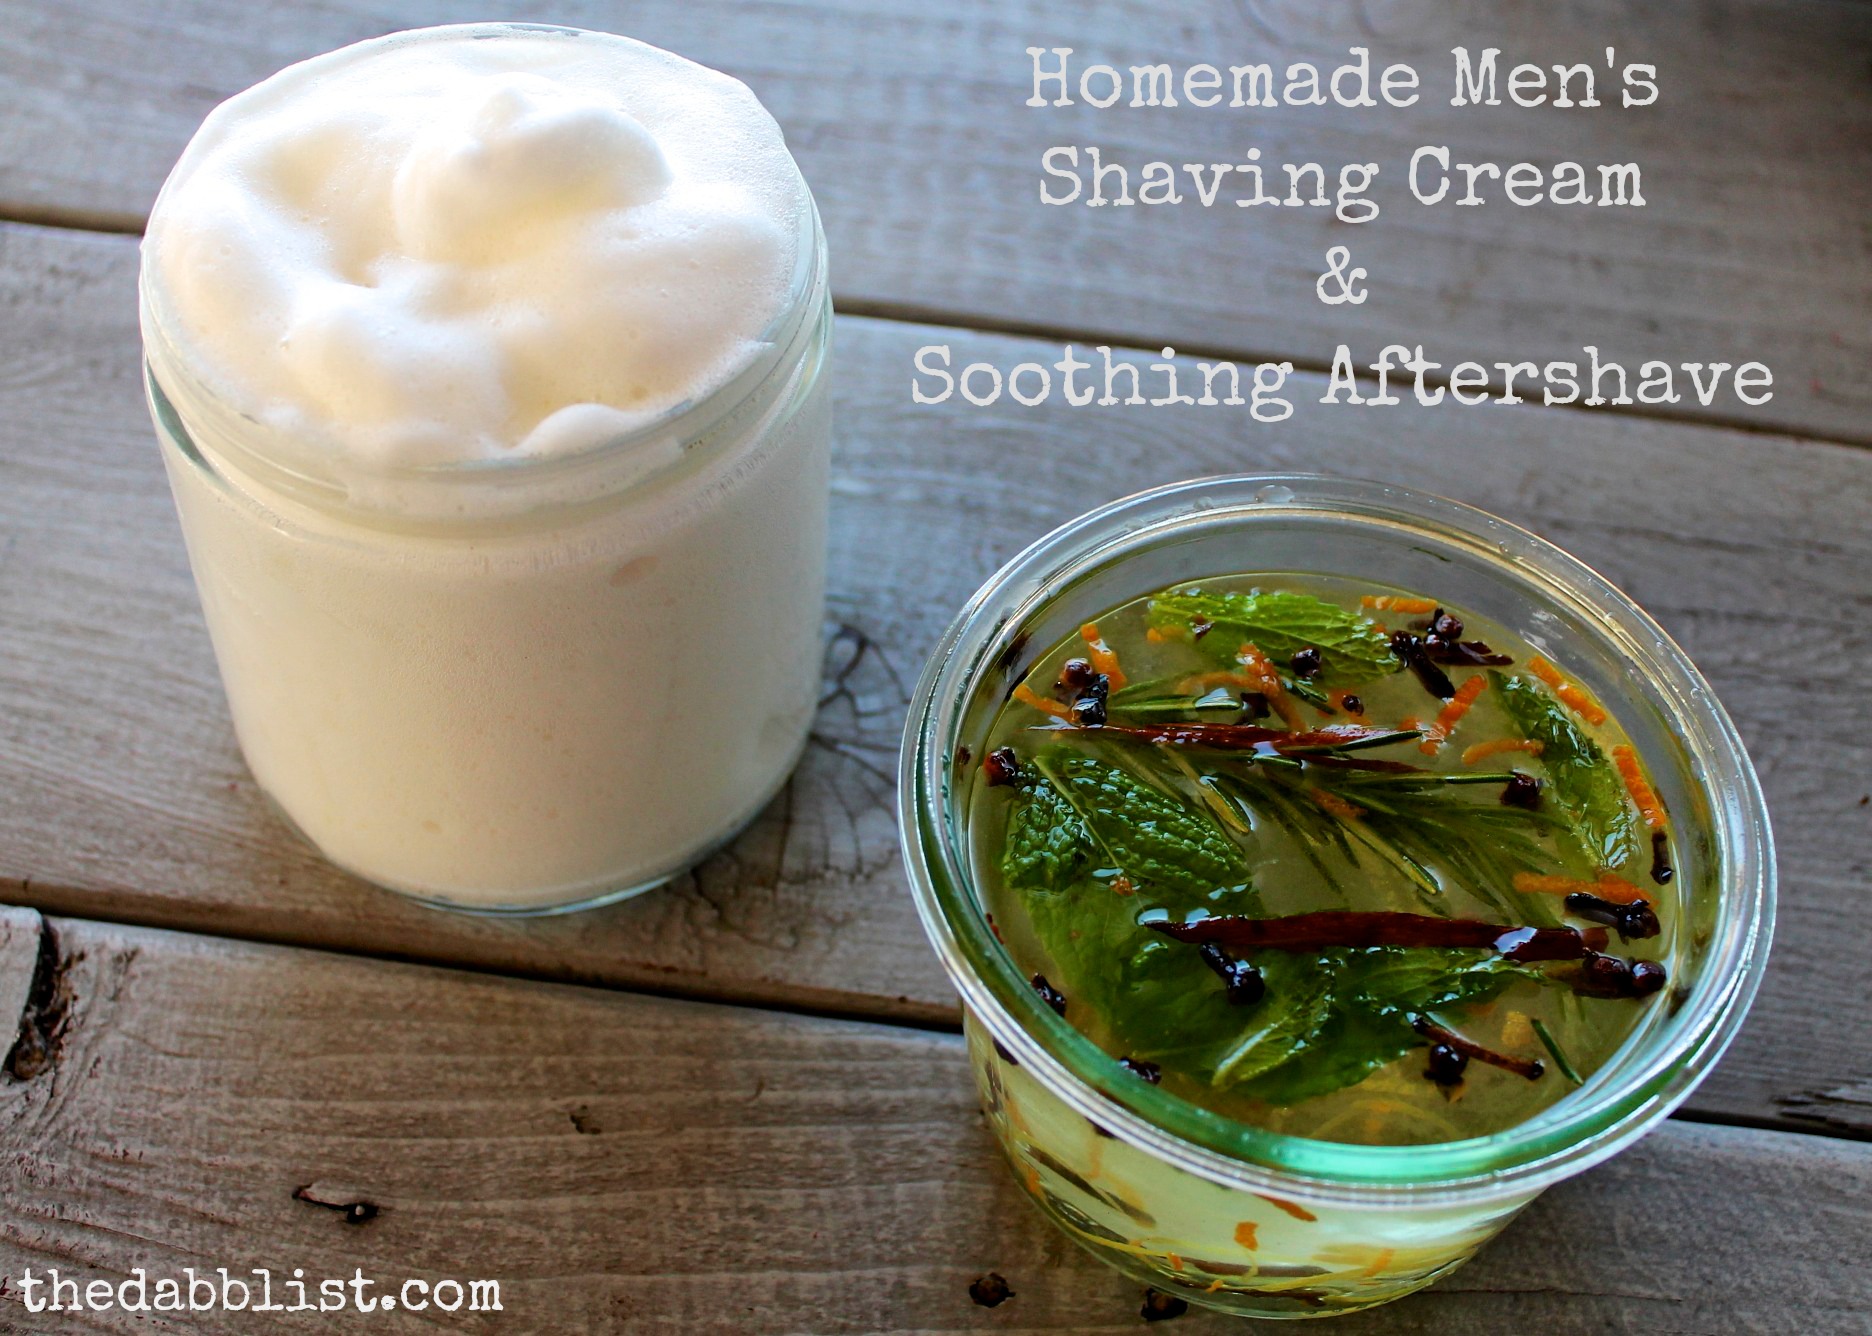 Homemade Herbal Shaving Cream & Citrus Spiced Aftershave